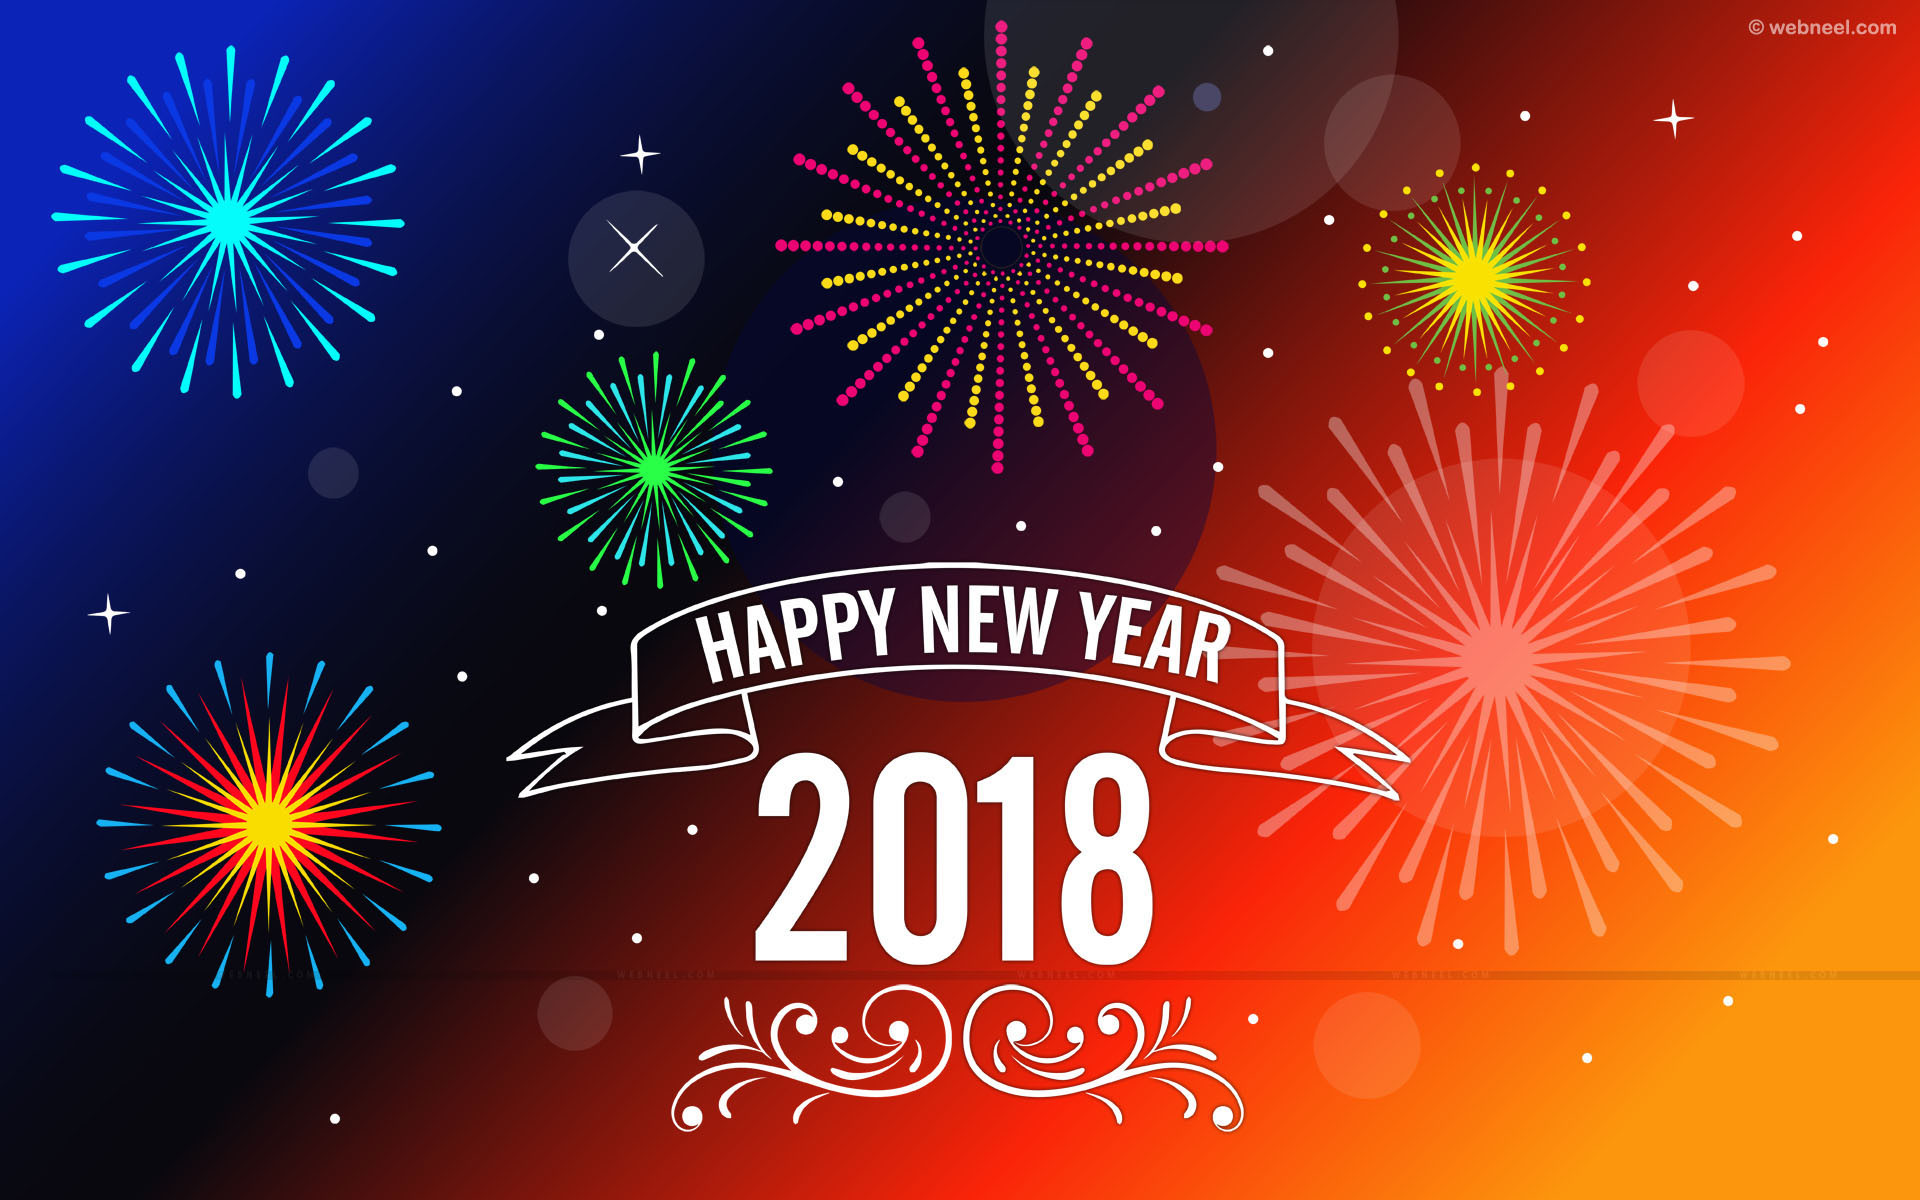 New Happy New Year 2018 Wallpaper 78 Images HD Wallpapers Download Free Images Wallpaper [wallpaper981.blogspot.com]